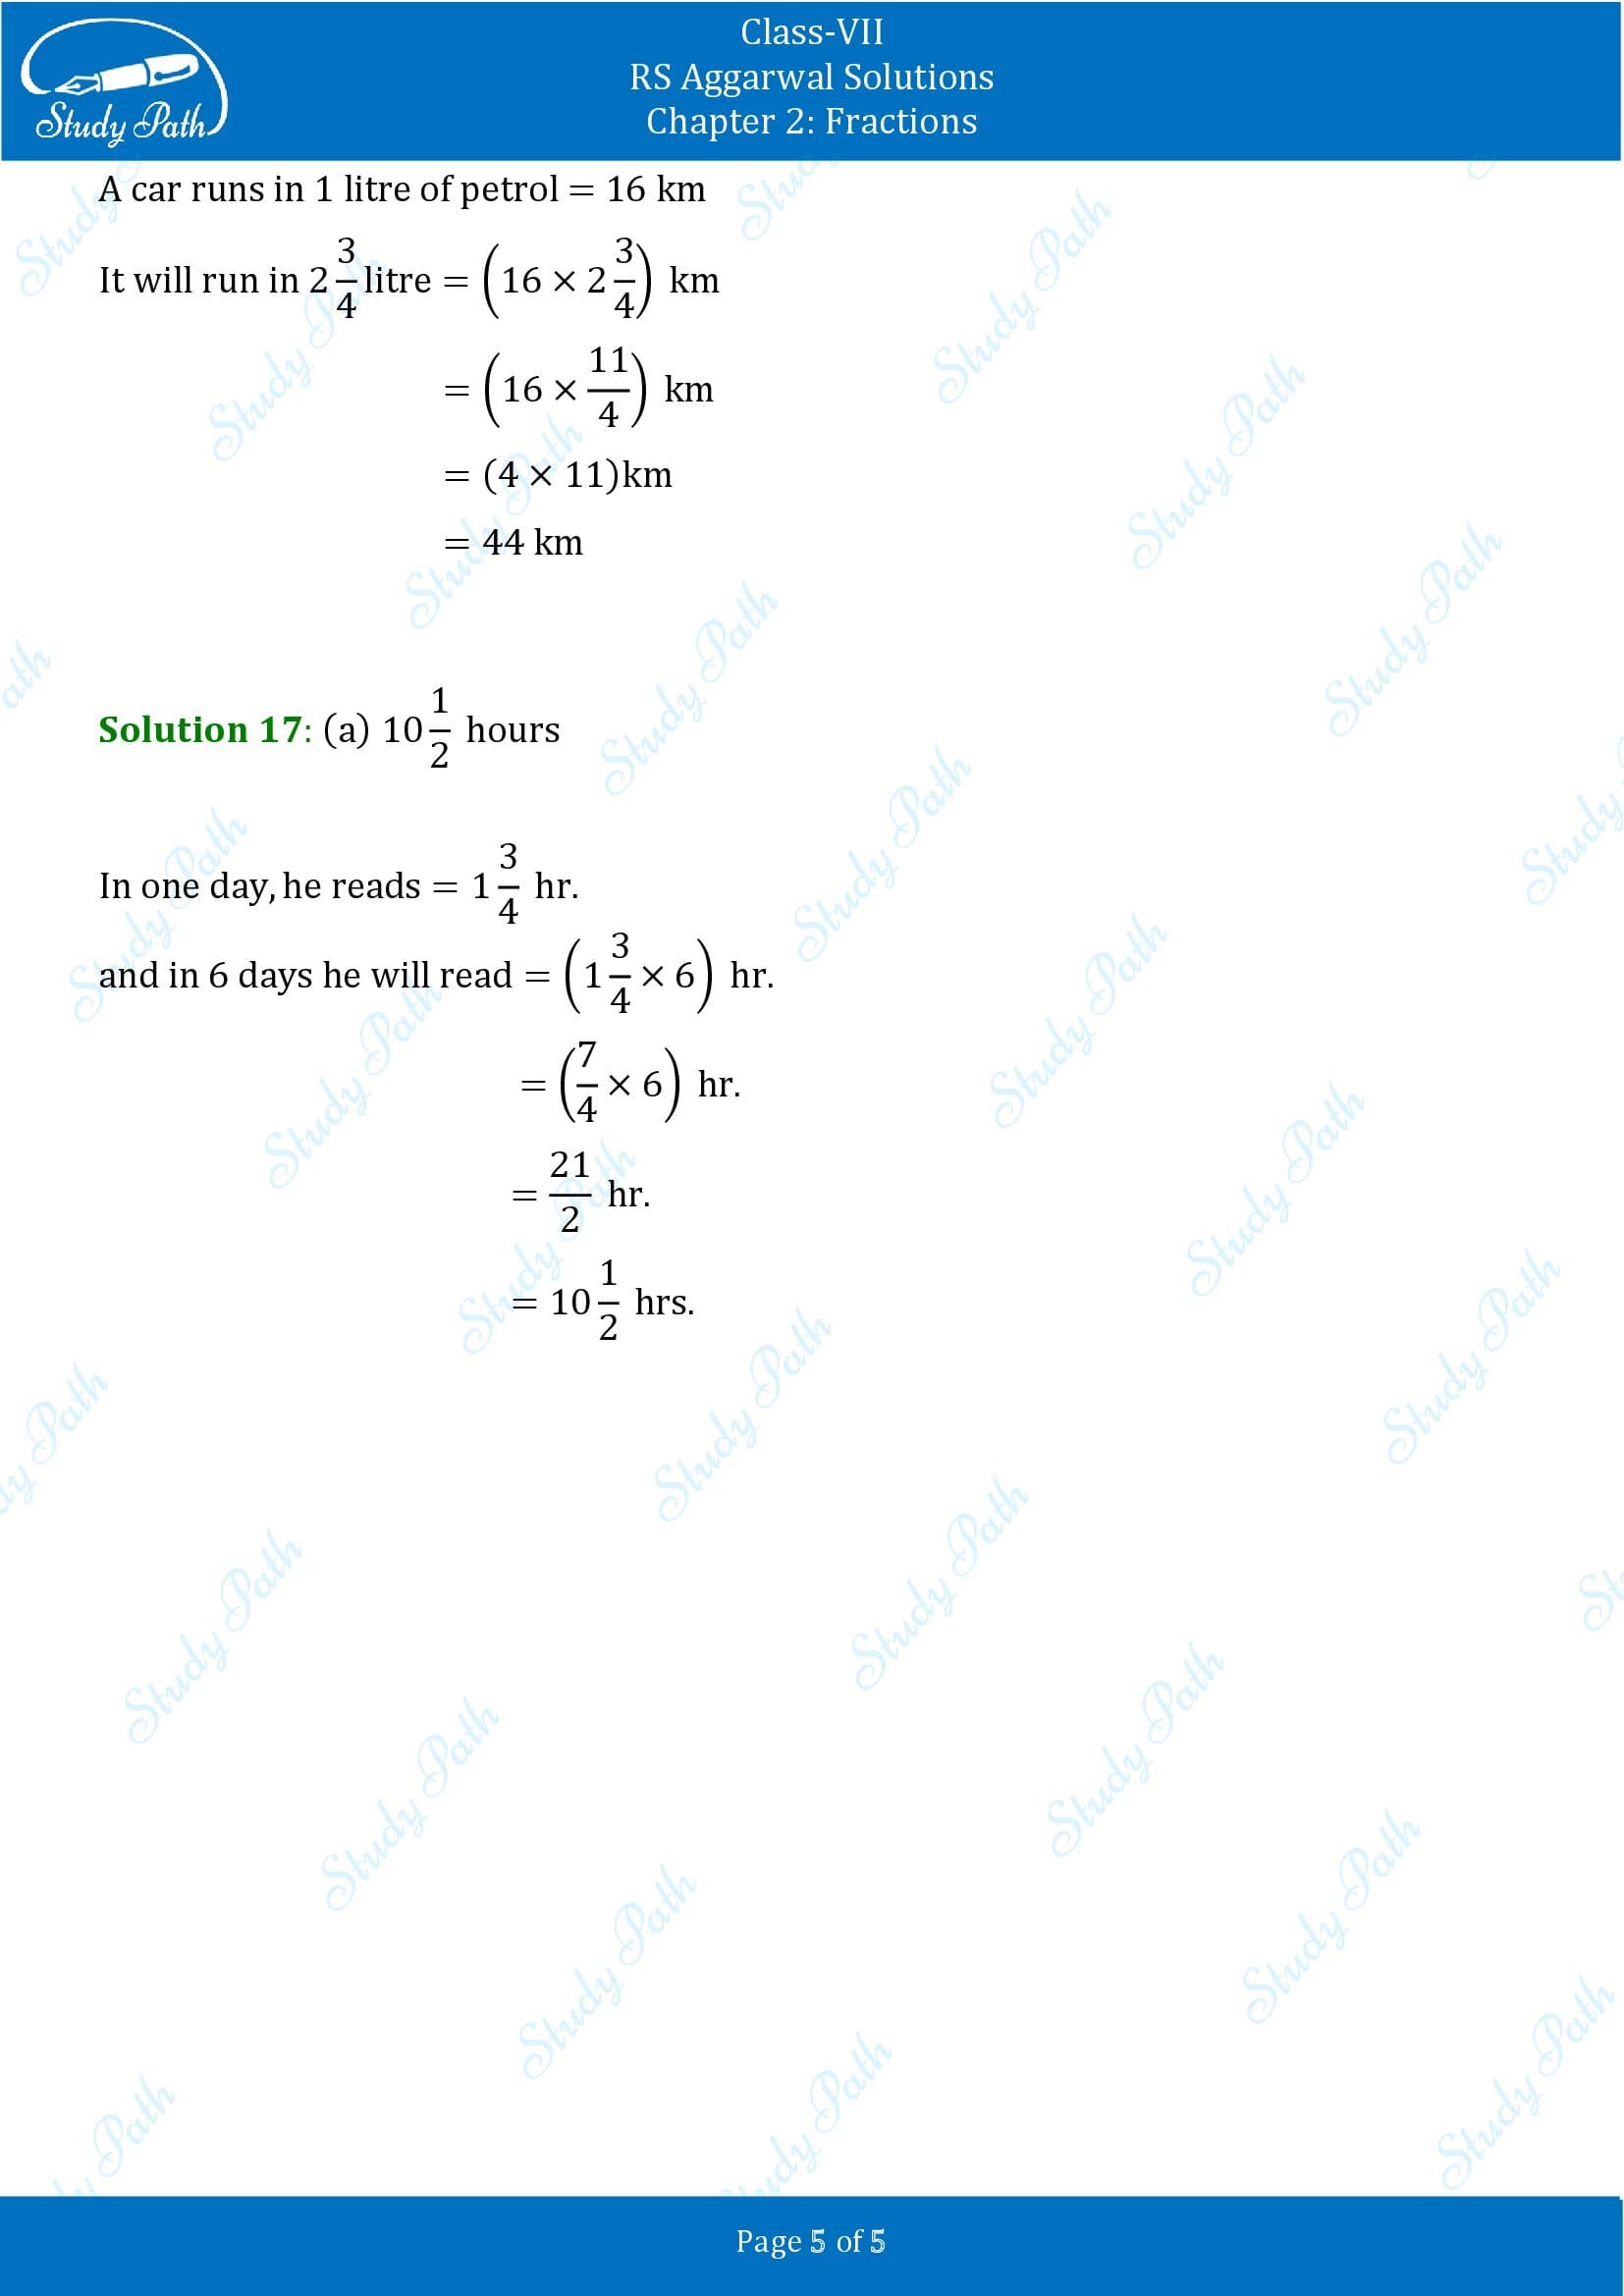 RS Aggarwal Solutions Class 7 Chapter 2 Fractions Exercise 2D MCQs 0005